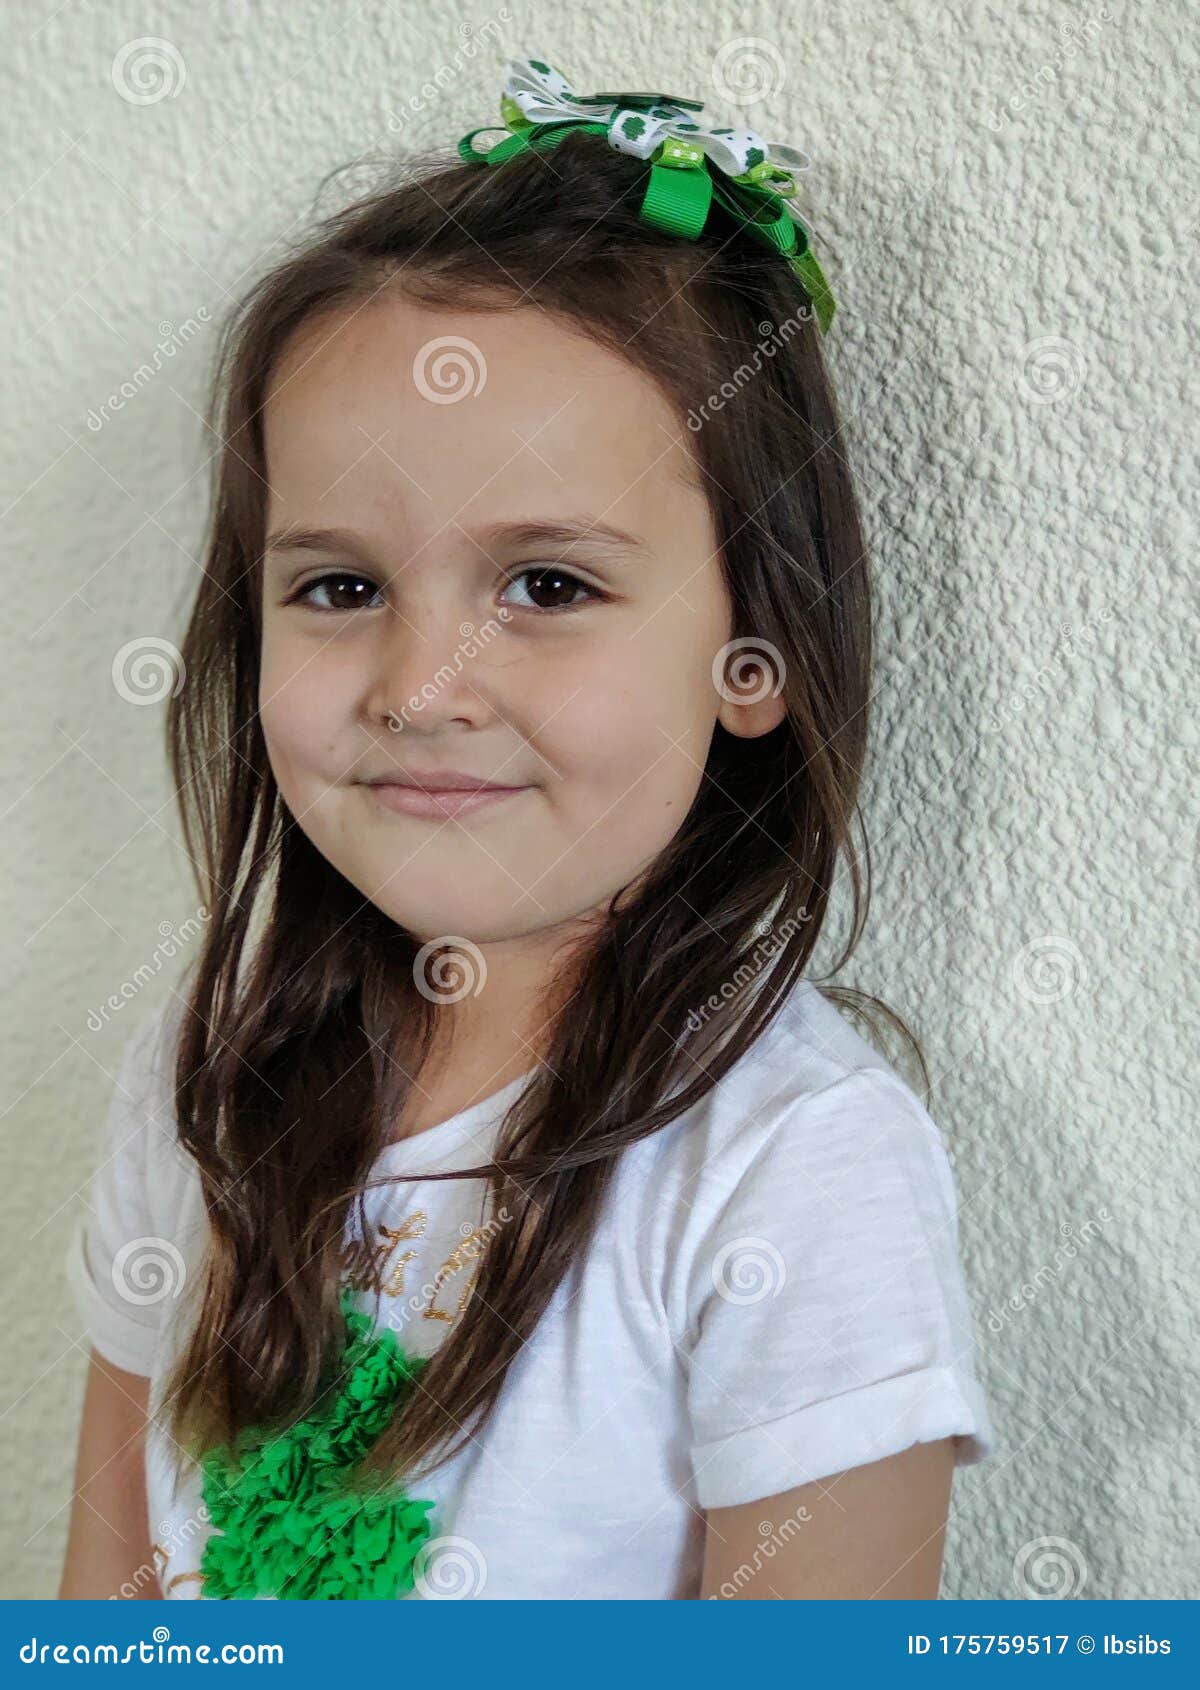 Irish Girl Dressed Up In Green To Celebrate Saint Patrickand X27 S Day Stock Image Image Of